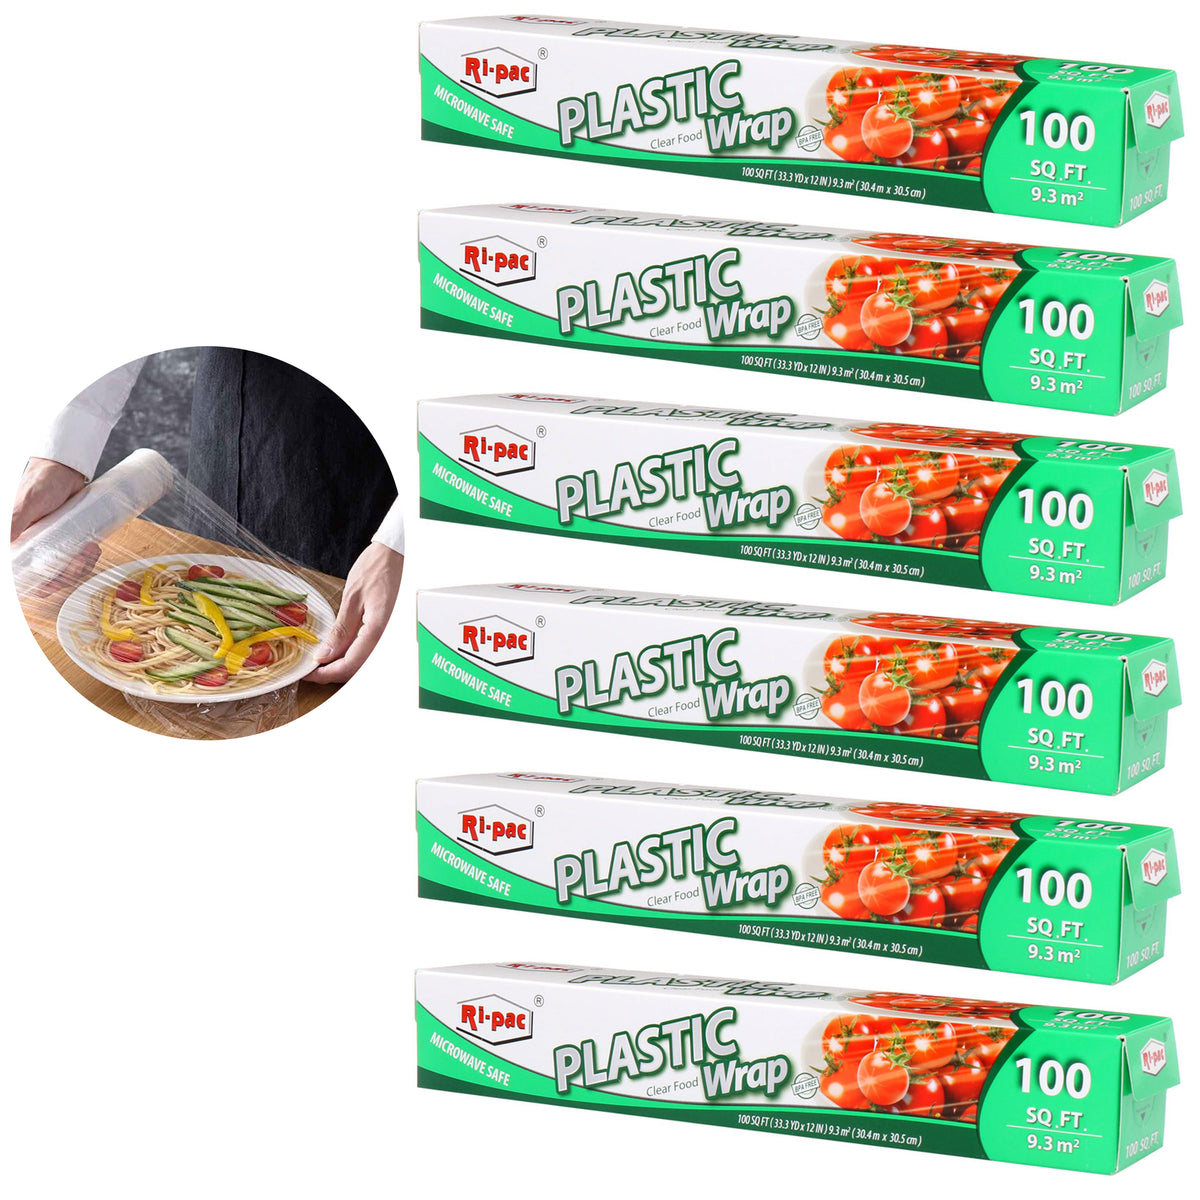 Clear Plastic Wrap & Food Safety